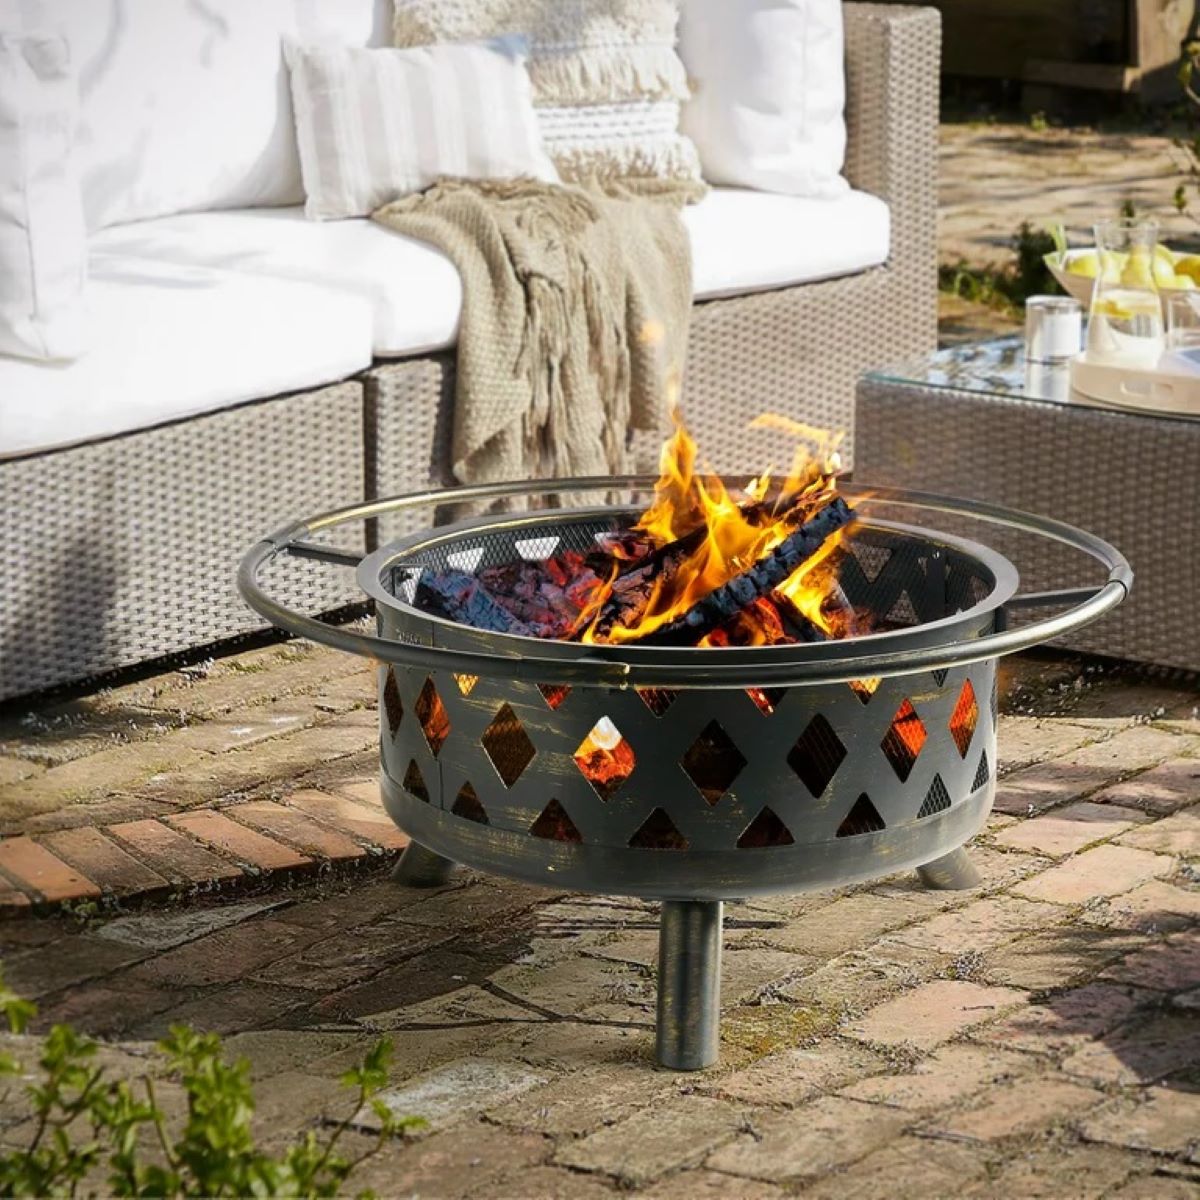 Outdoor Fire Pits Are On Sale Now At Walmart